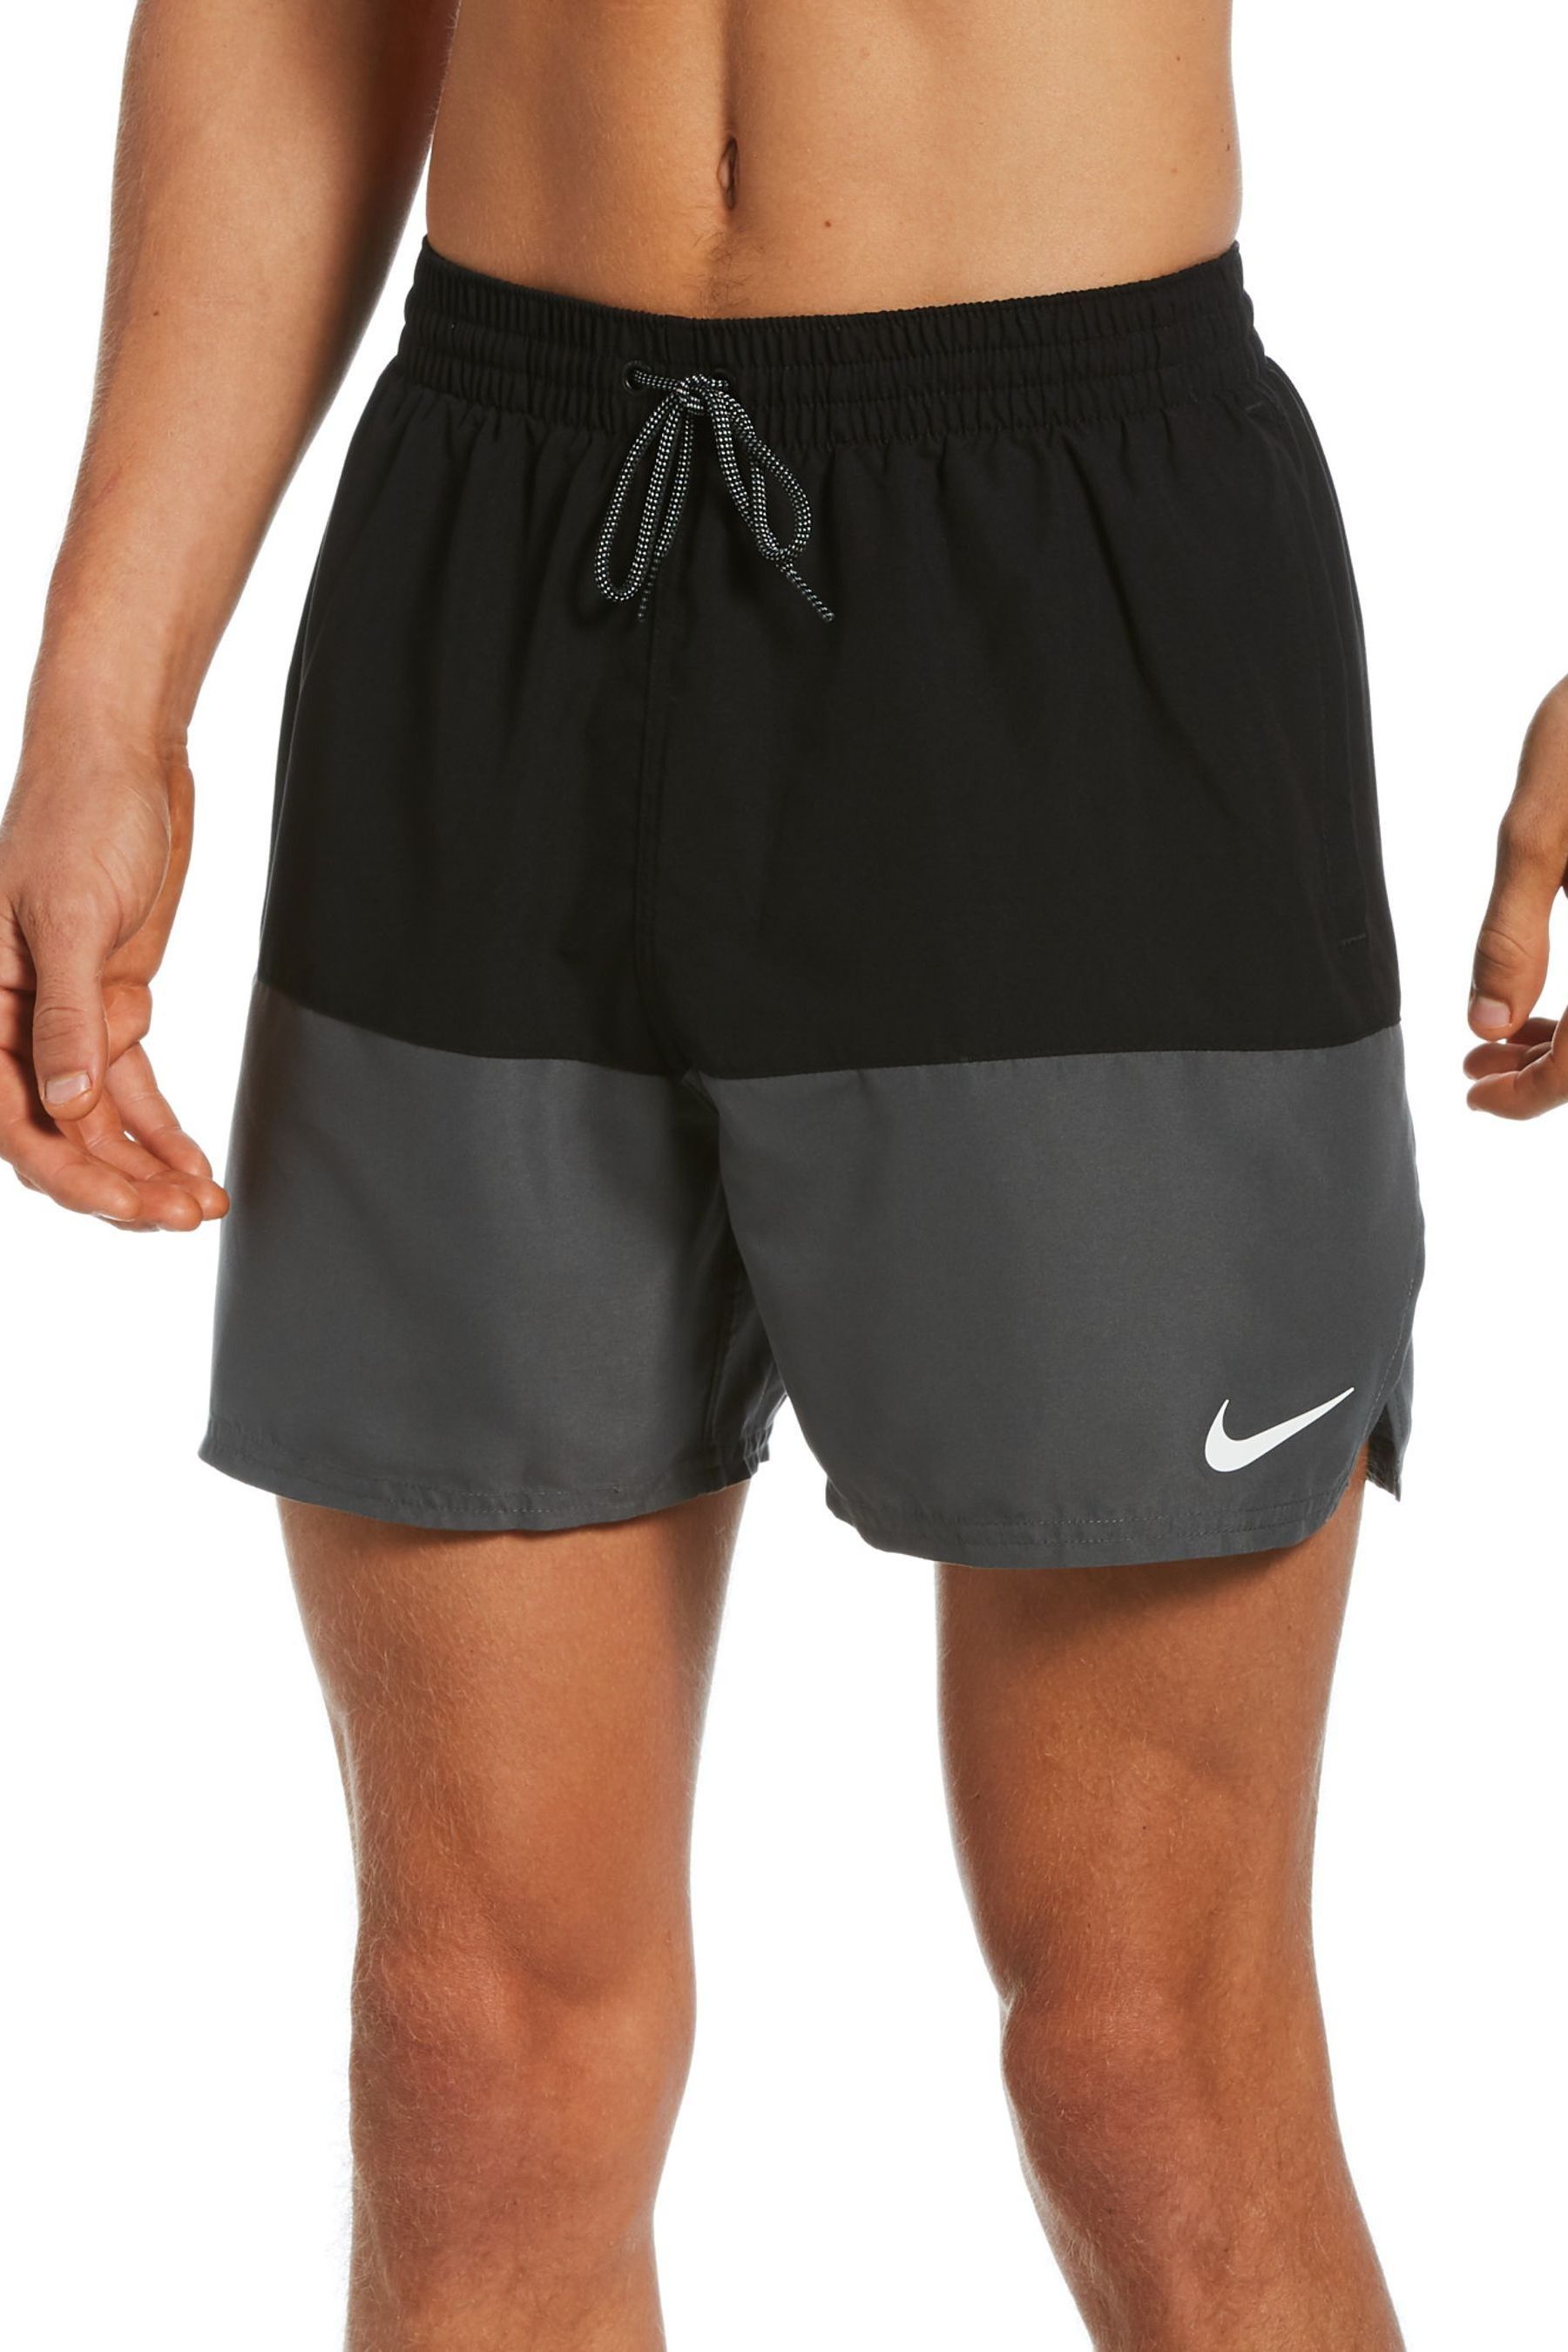 Buy Nike Split 5 Inch Volley Swim Shorts from the Next UK online shop